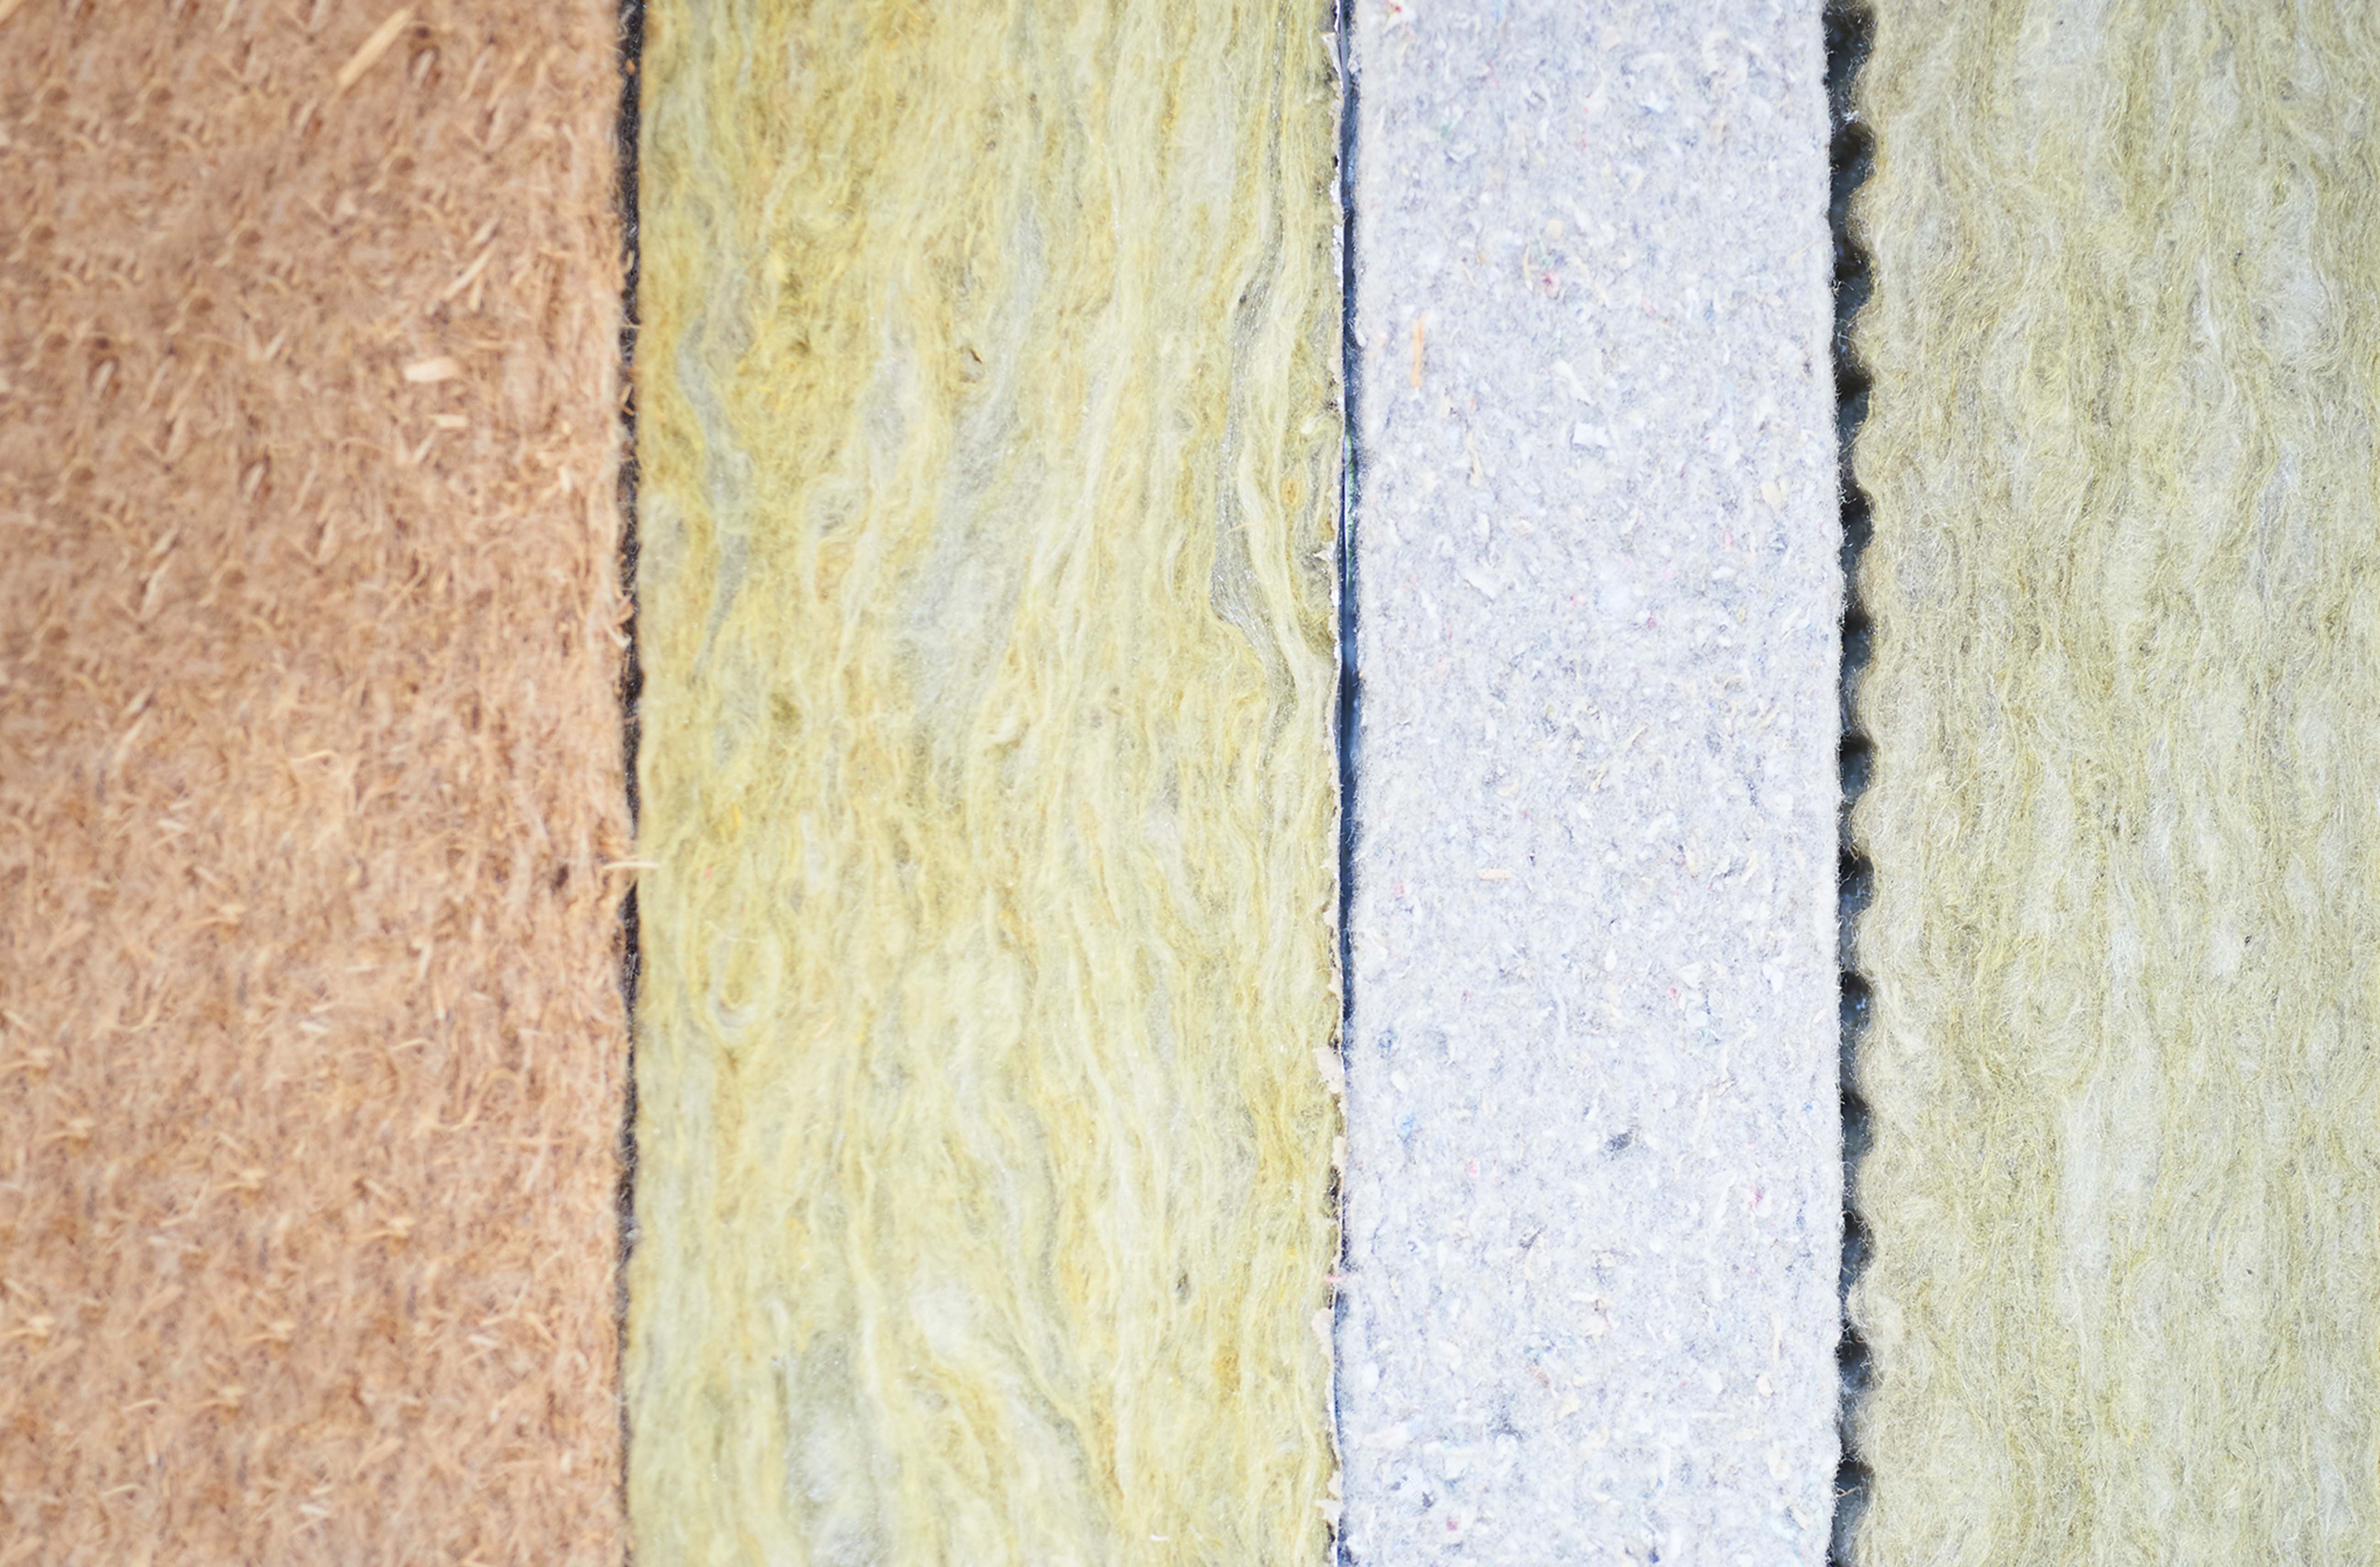 Production and finishing of insulation materials